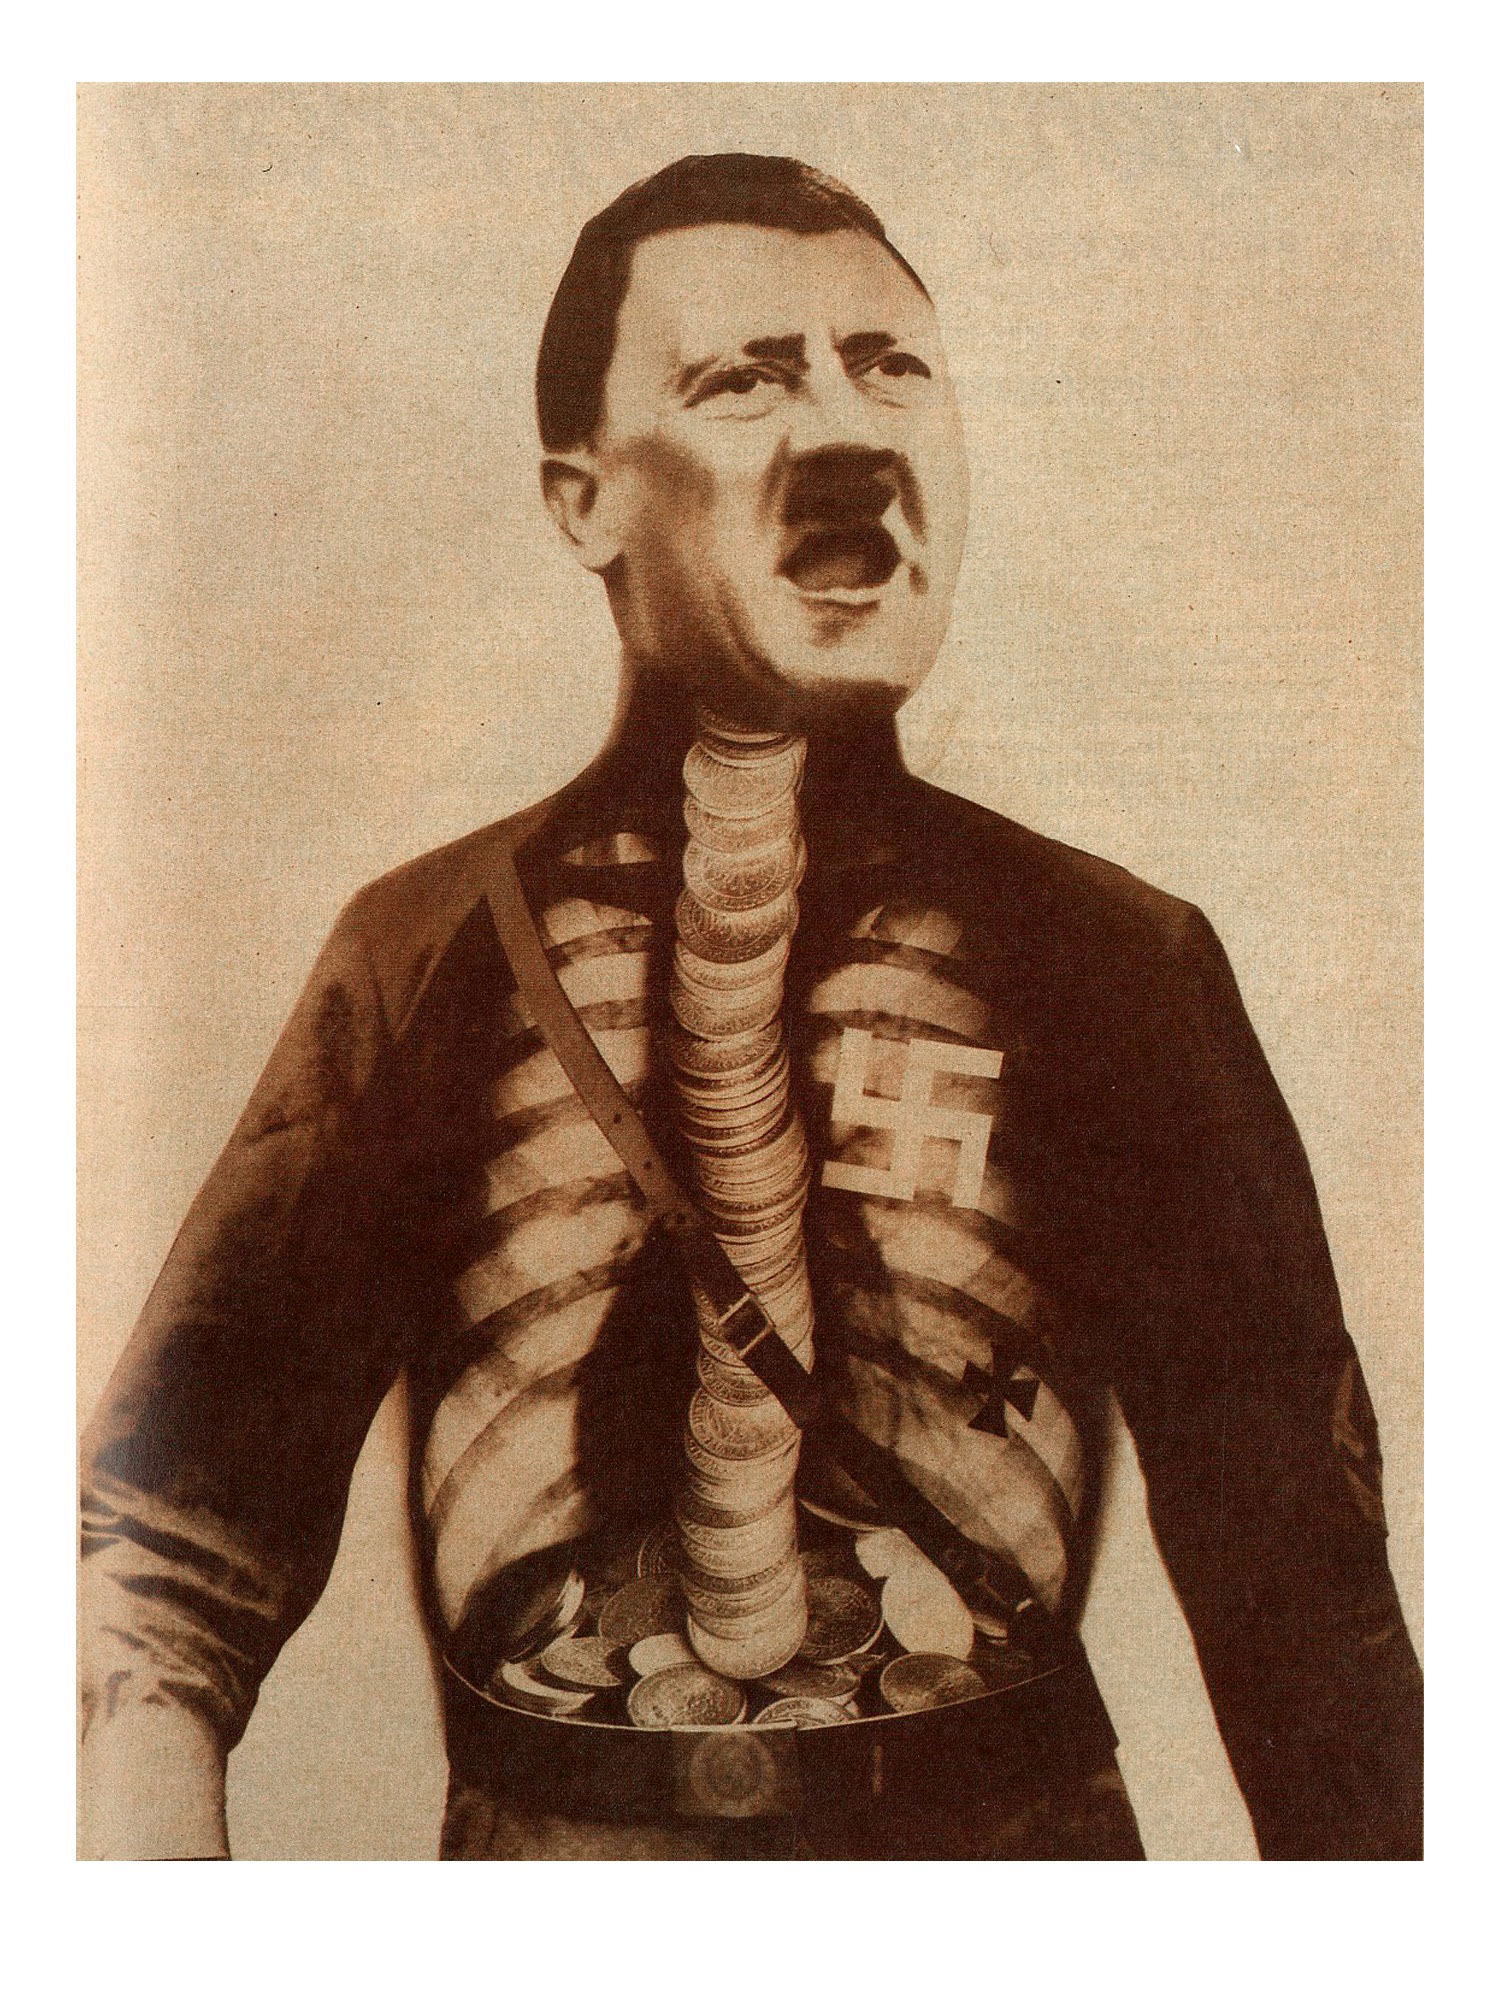 Adolf, the Superman, Swallows Gold and Spouts Tin, 1932 by John Heartfield